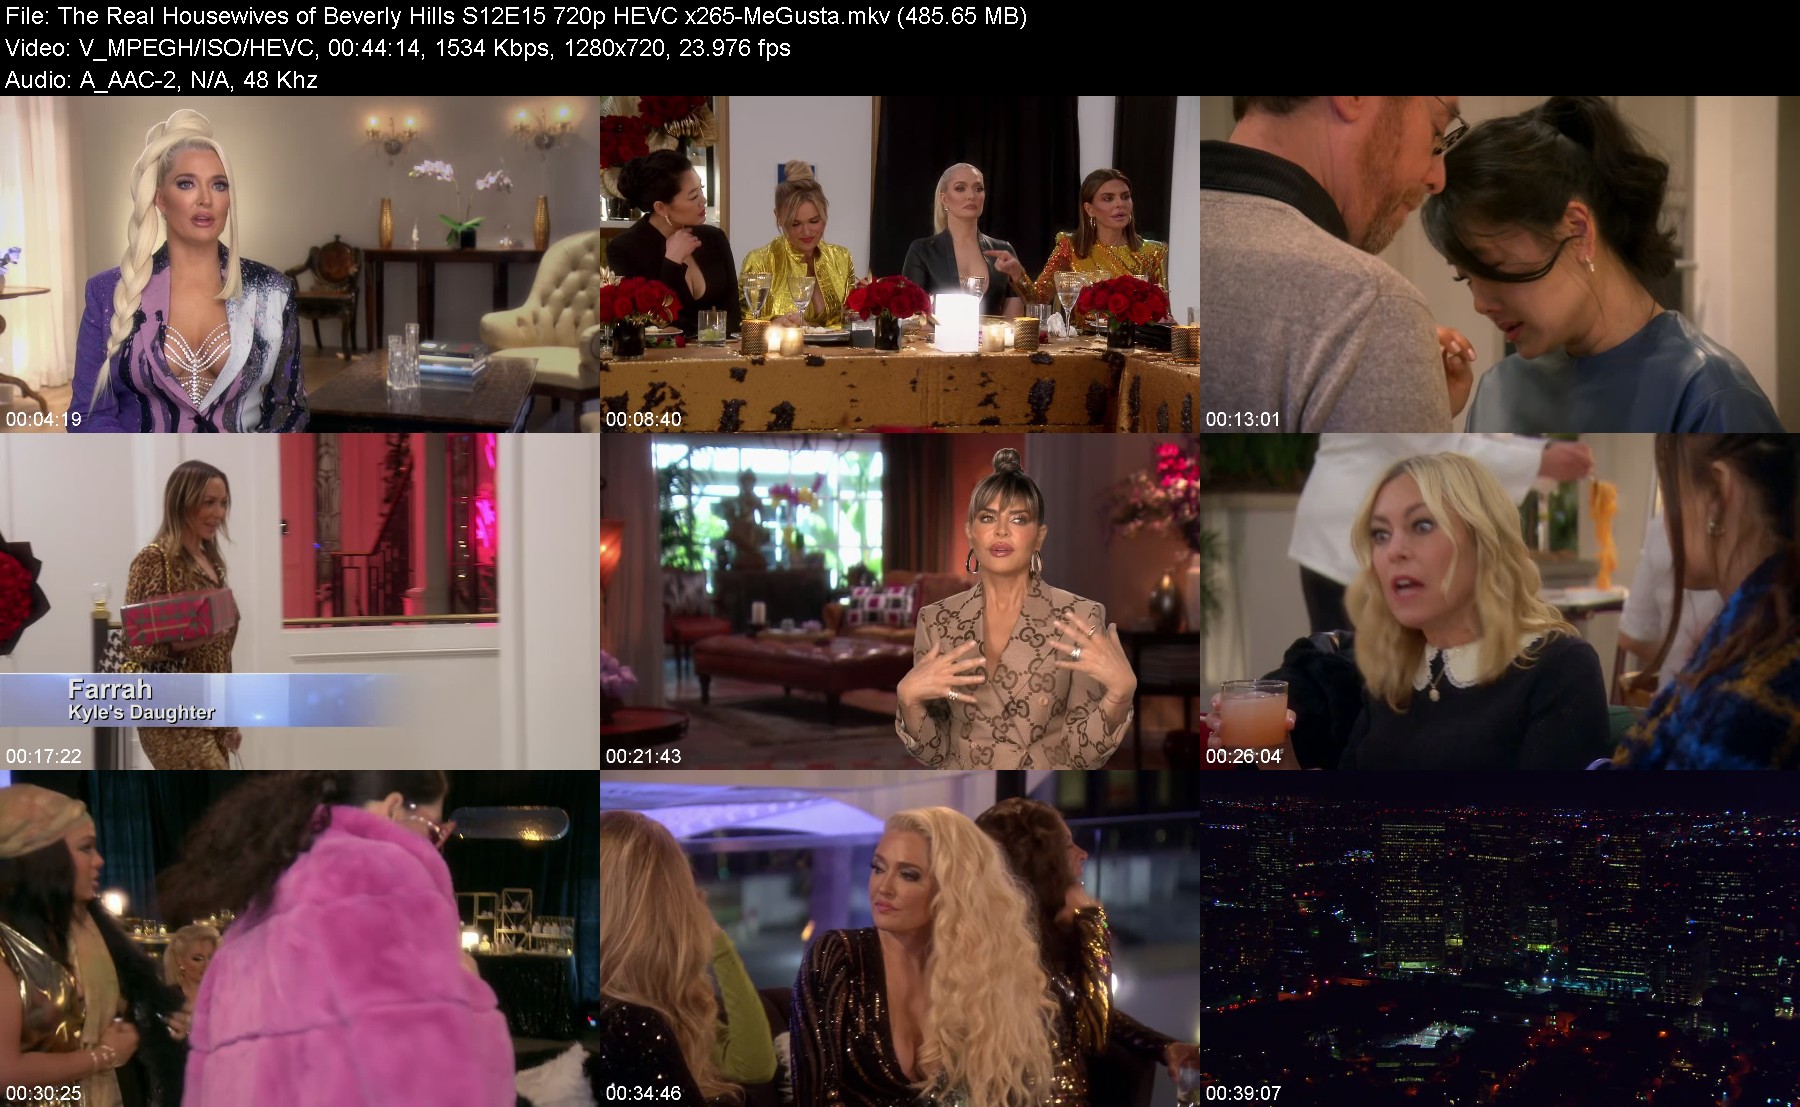 300801710_the-real-housewives-of-beverly-hills-s12e15-720p-hevc-x265-megusta.jpg